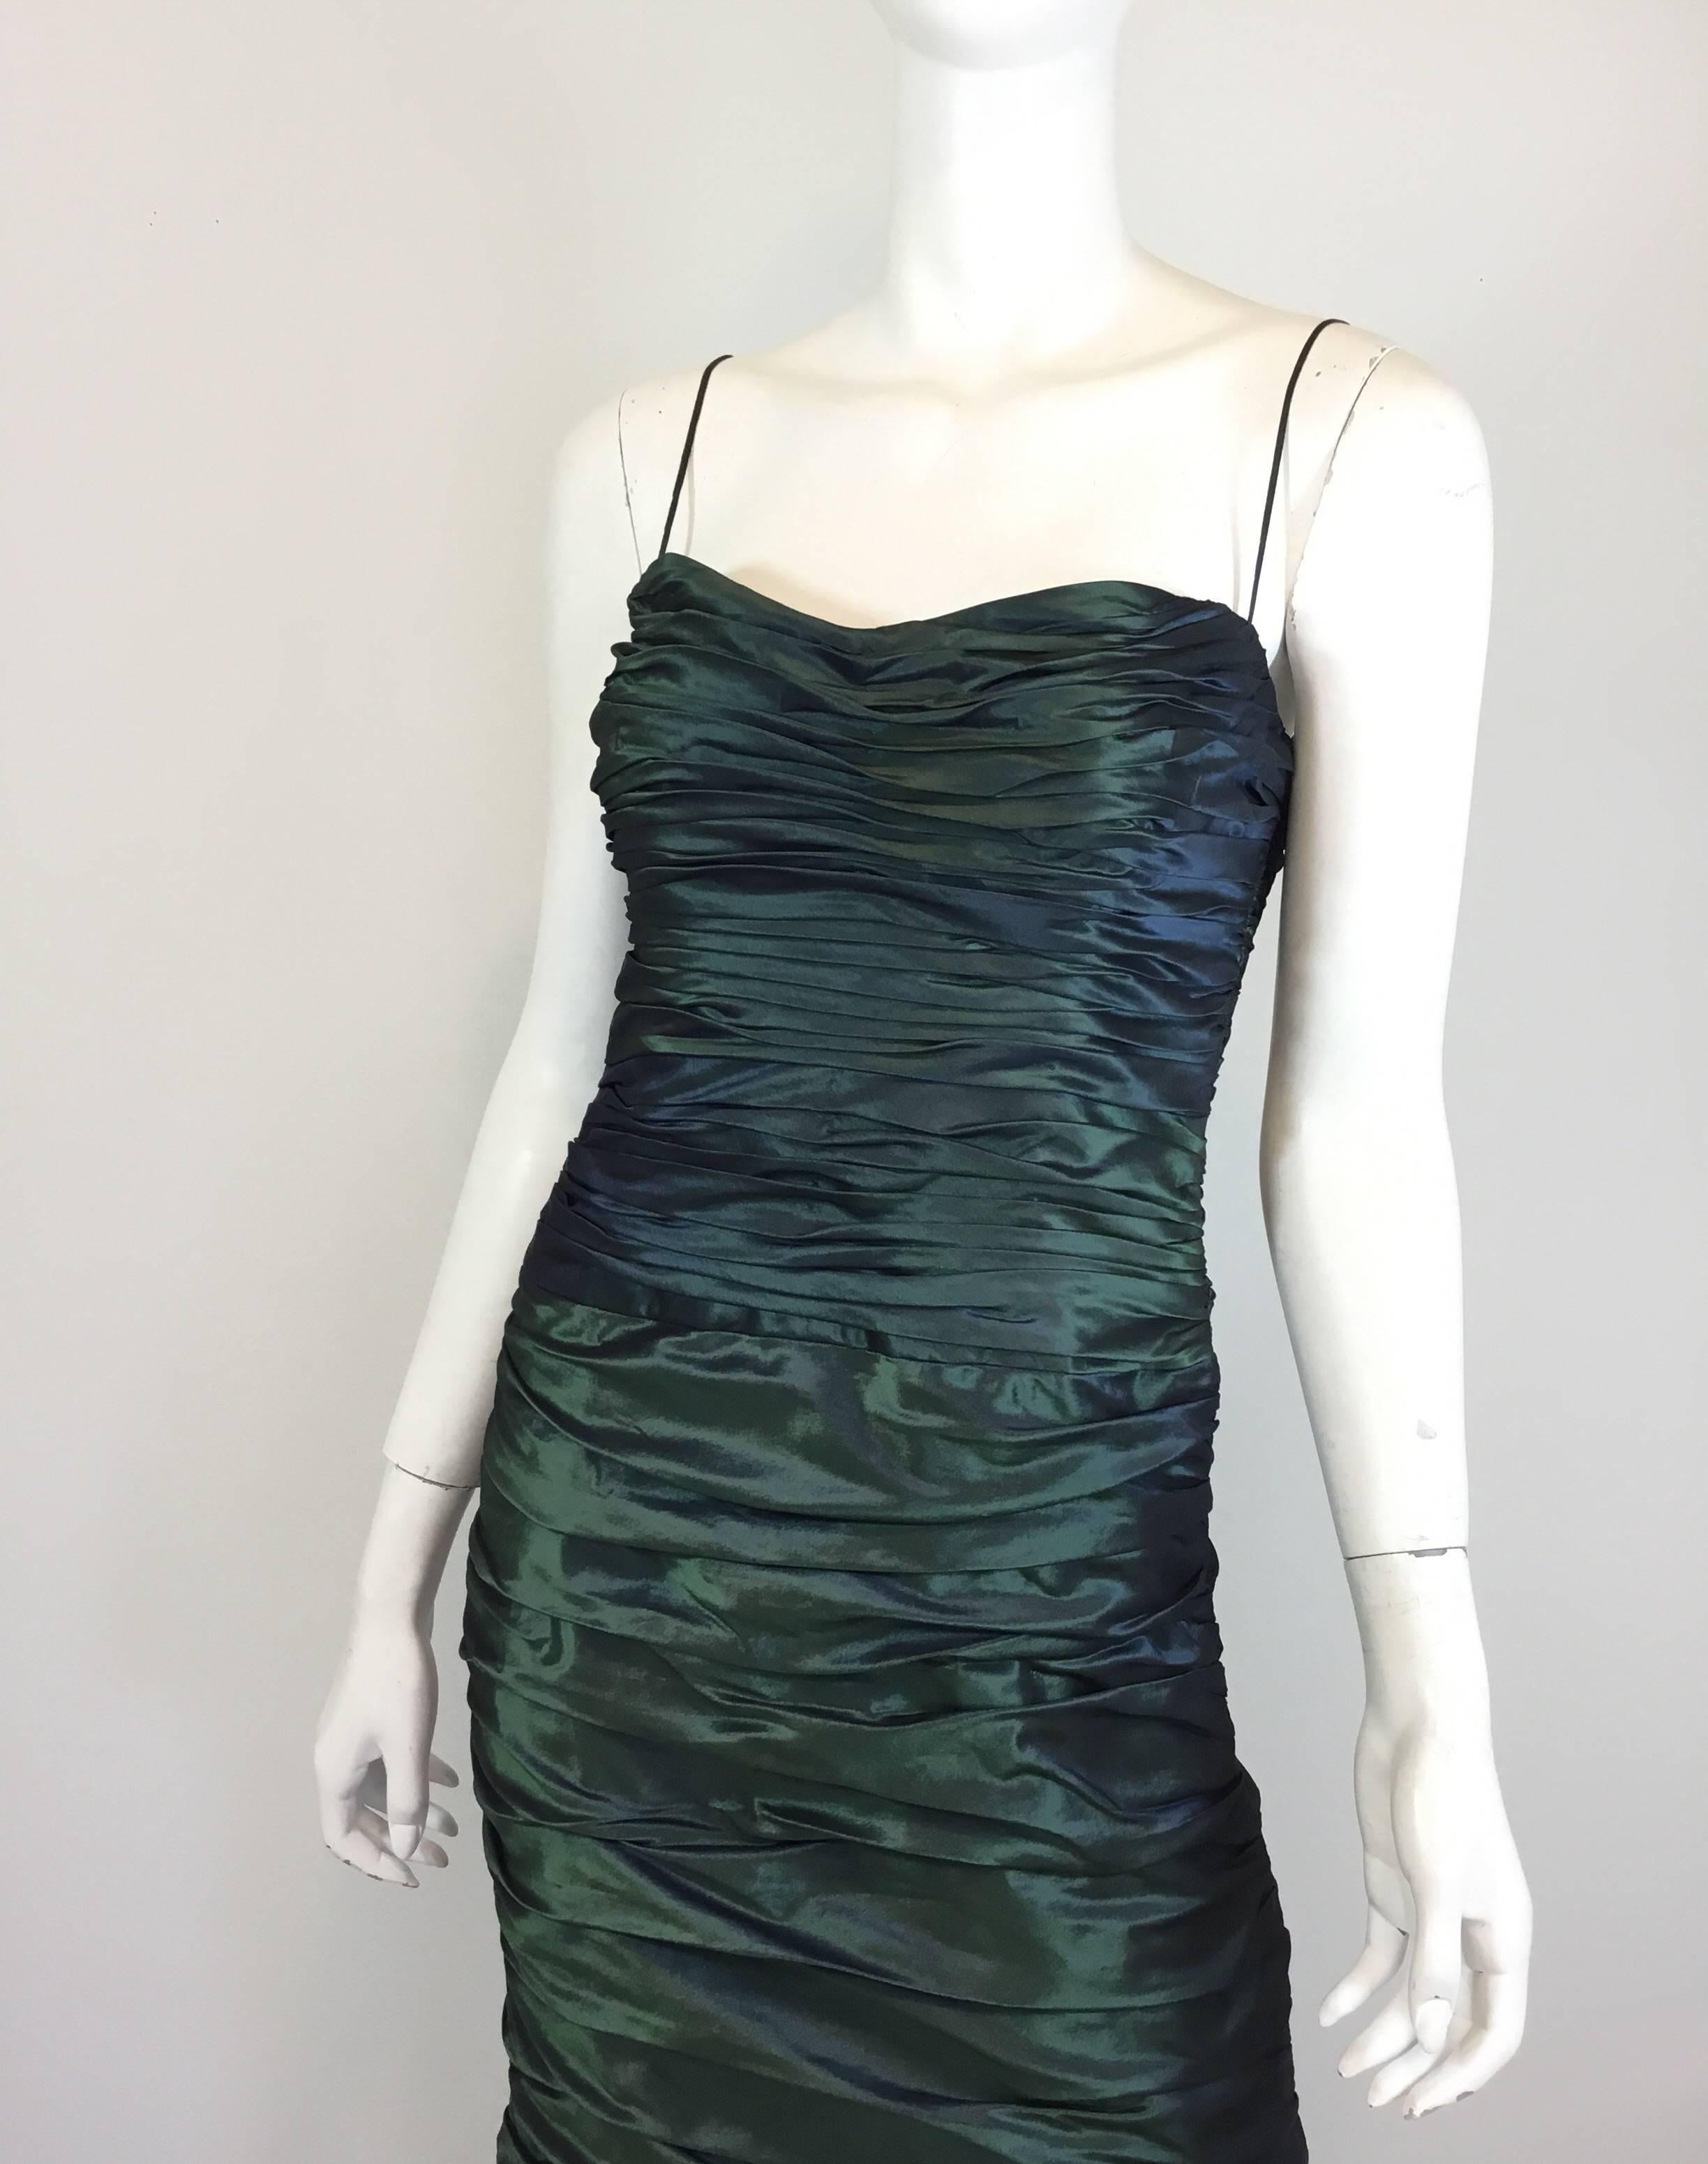 Teri Jon dress featured in an iridescent green color with a Ruched/gathered design throughout, spaghetti shoulder straps and a back zipper fastening. Dress is labeled Size 6 and 100% silk. Fully lined.

Bust 30”, waist 28”, hips 35”, length 47”